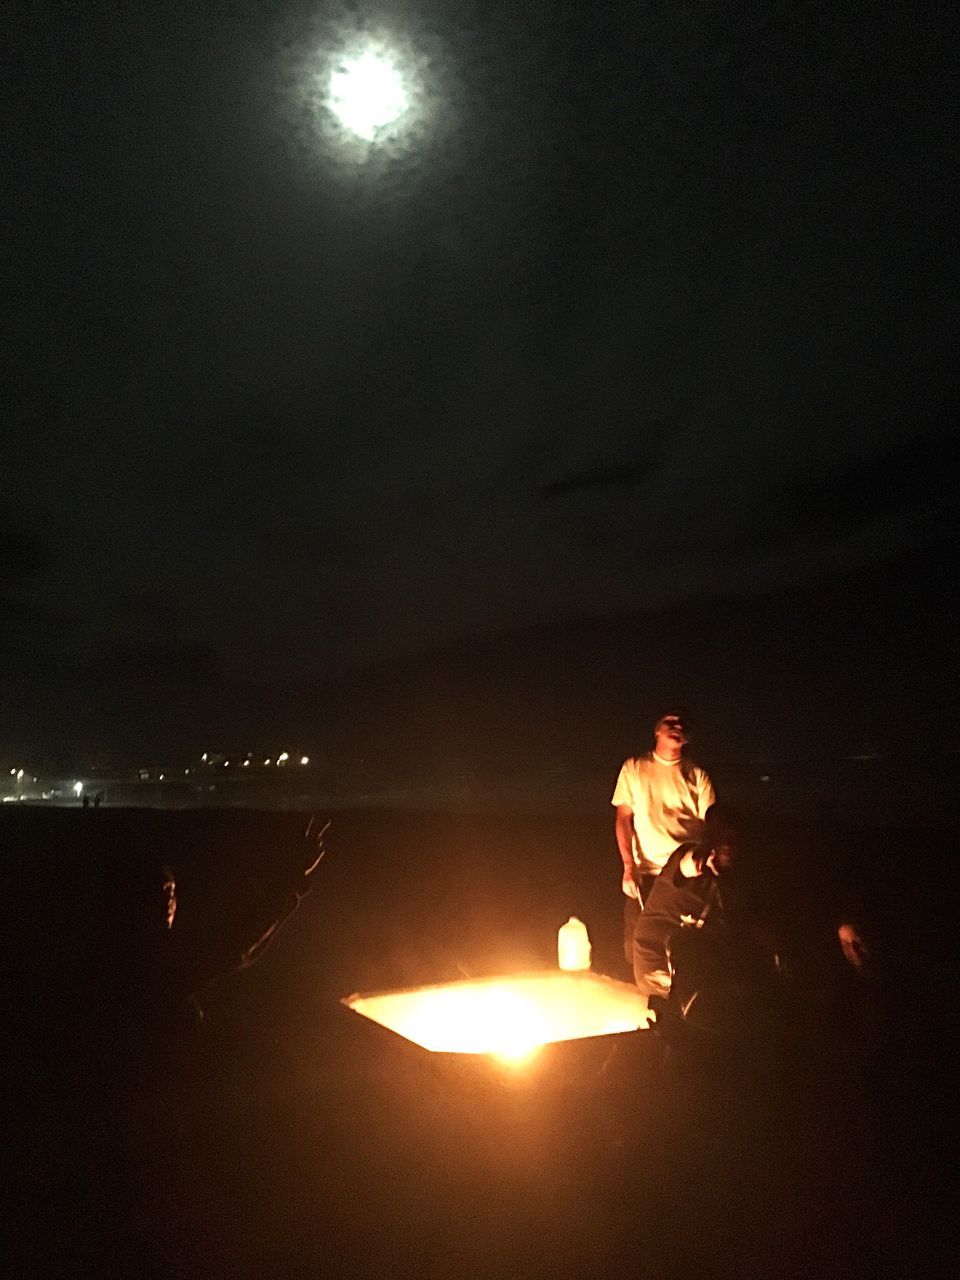 lifestyles, leisure activity, standing, night, illuminated, men, burning, flame, fire - natural phenomenon, sun, full length, casual clothing, glowing, rear view, young adult, person, holding, sitting